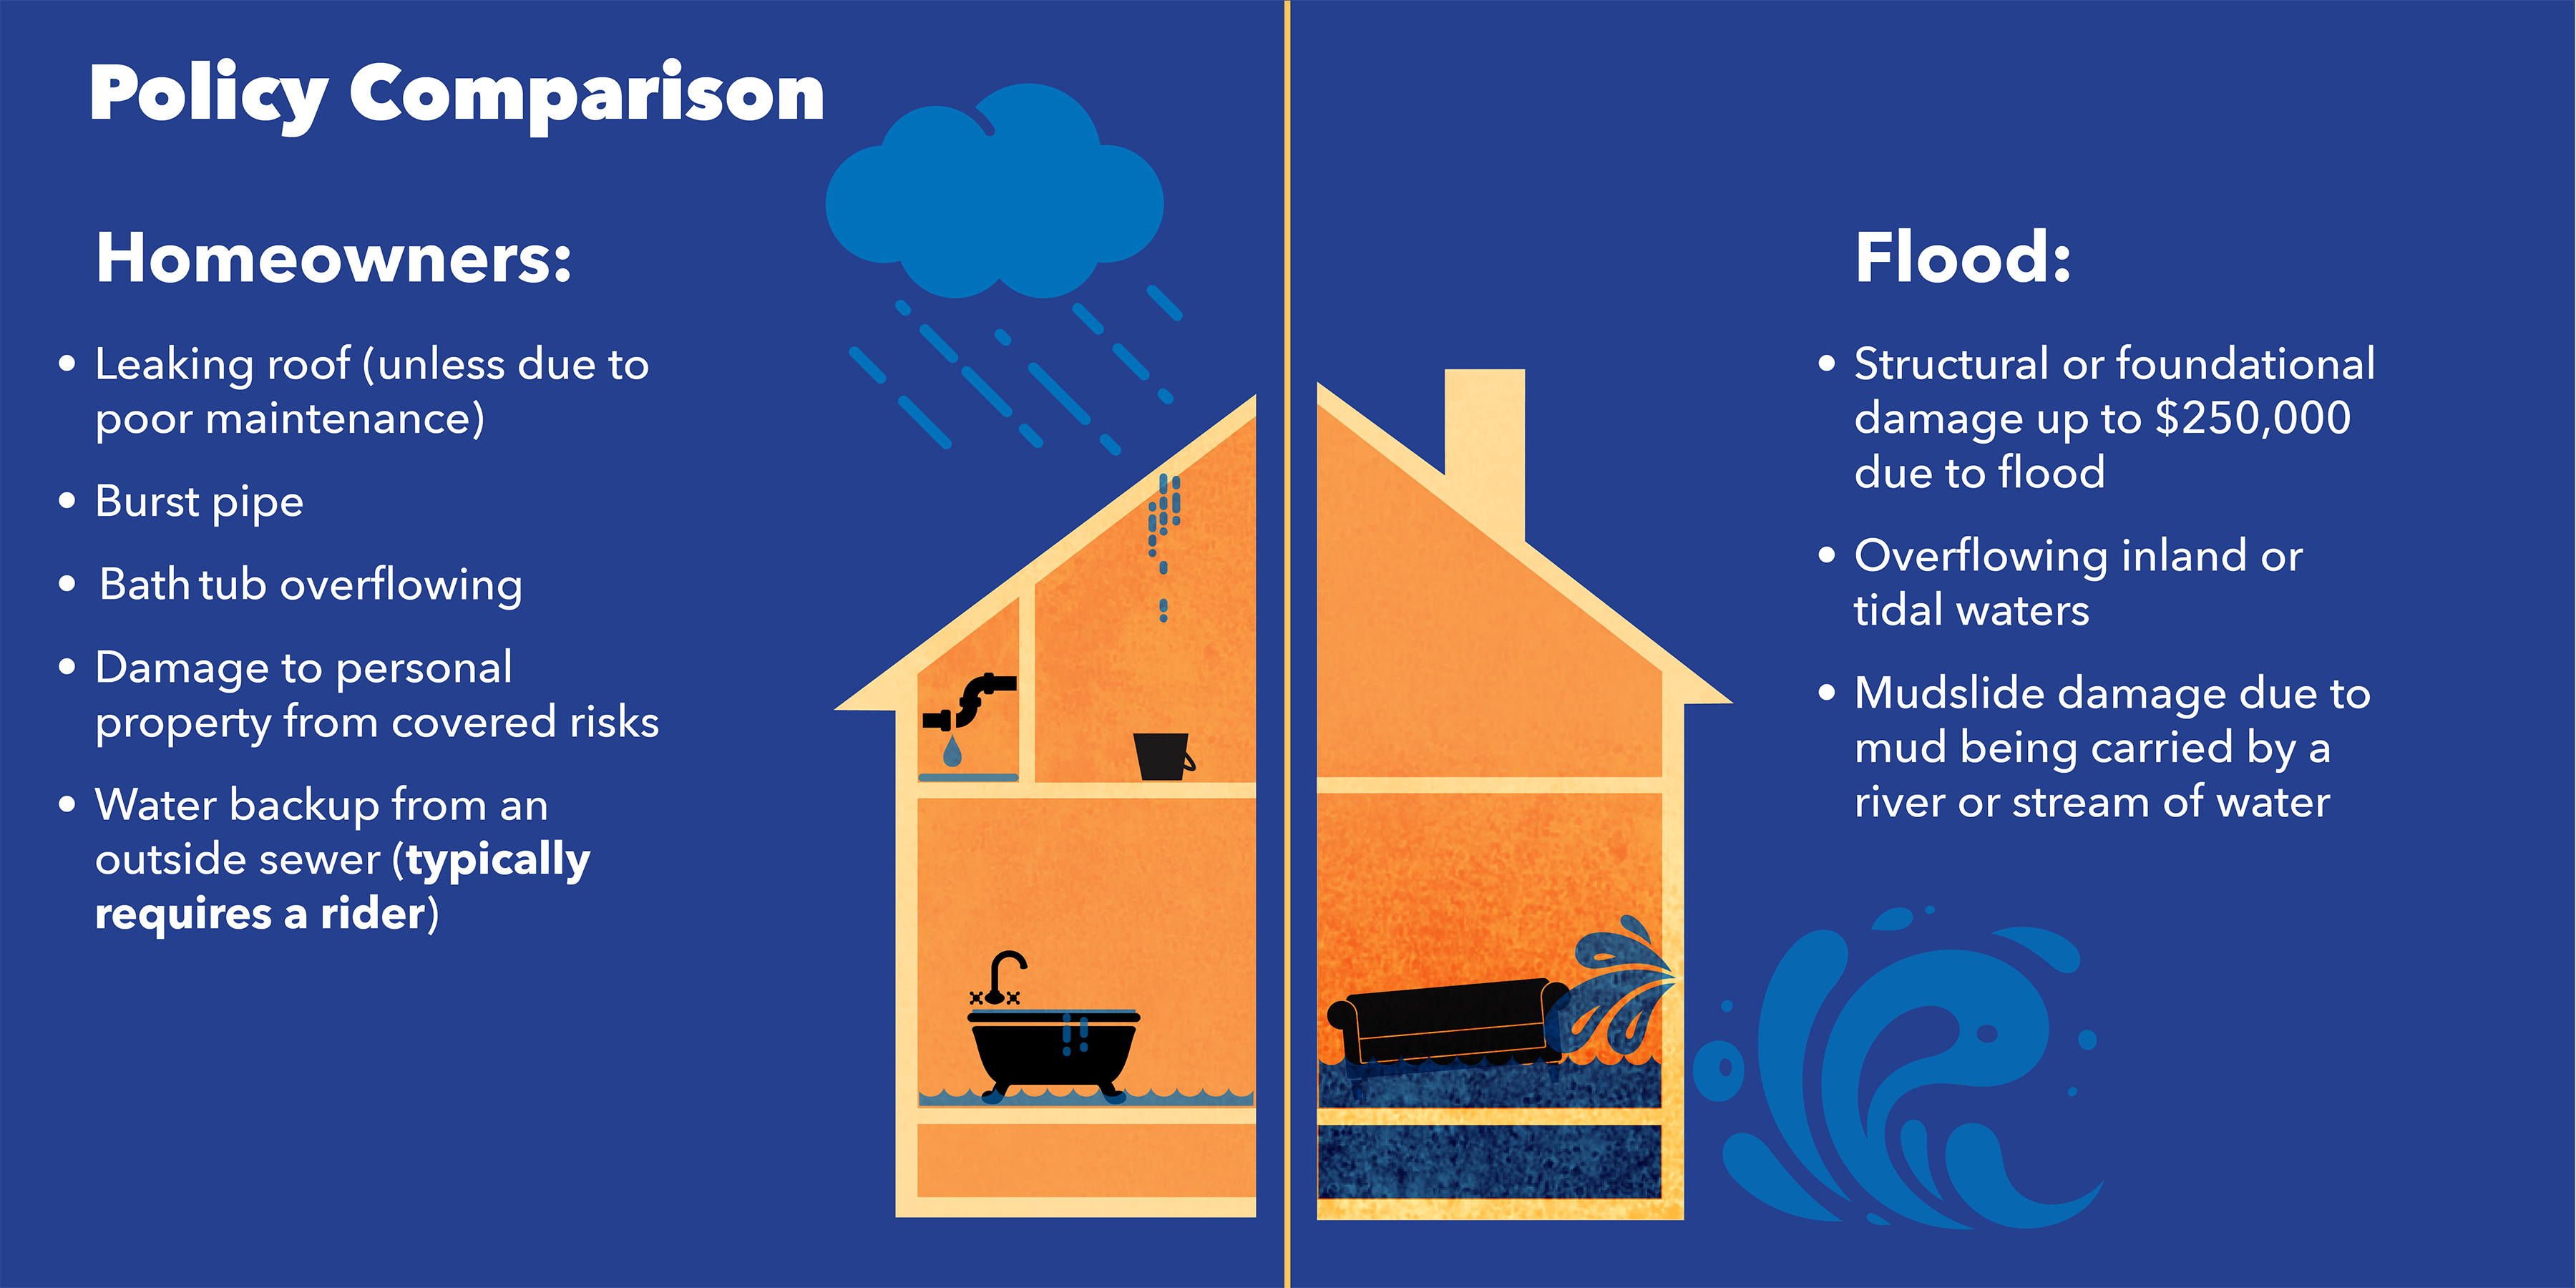 Flood insurance policies for homeowners